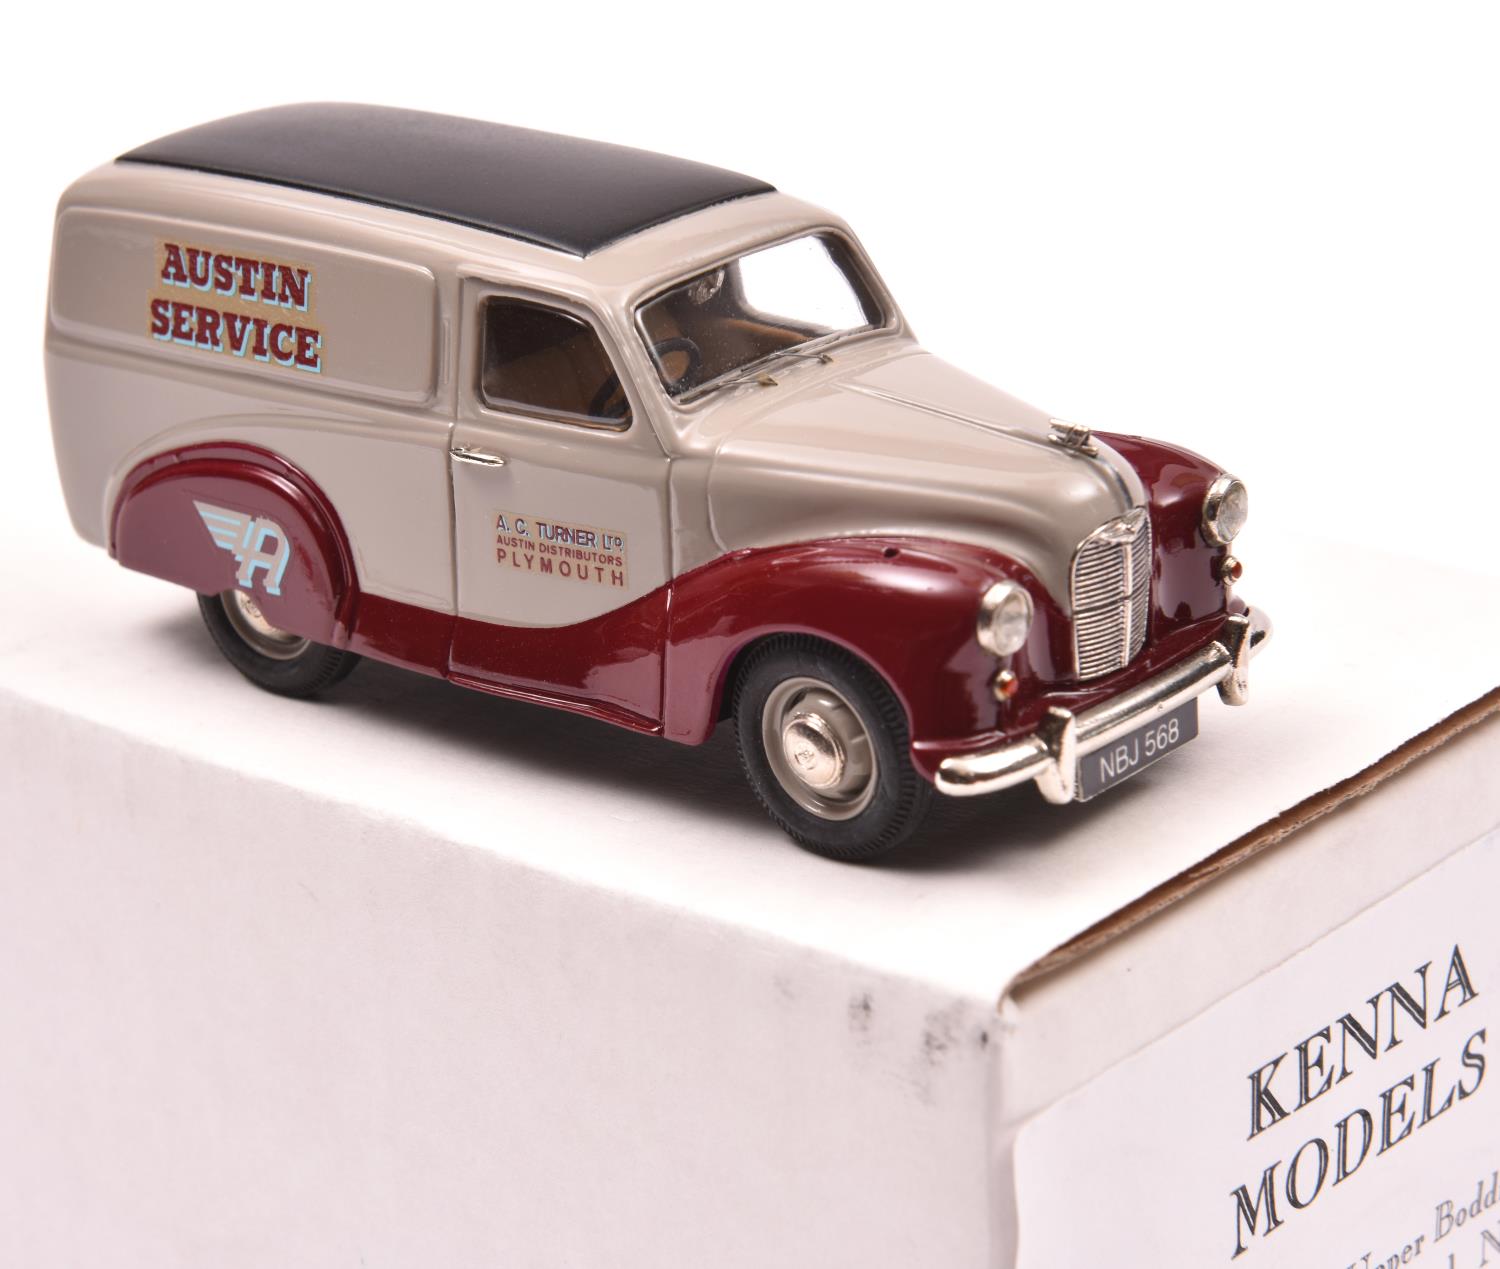 Kenna Models Austin Devon Van. A Limited Edition 10/100 produced in light brown and maroon Austin